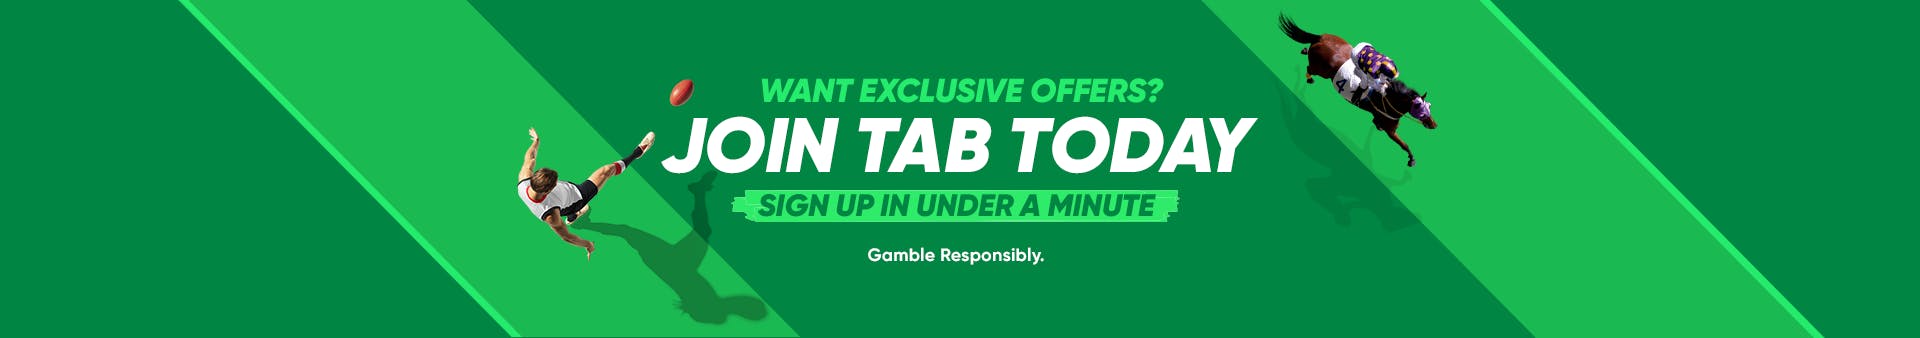 Tab online betting qld time total tennis betting guide